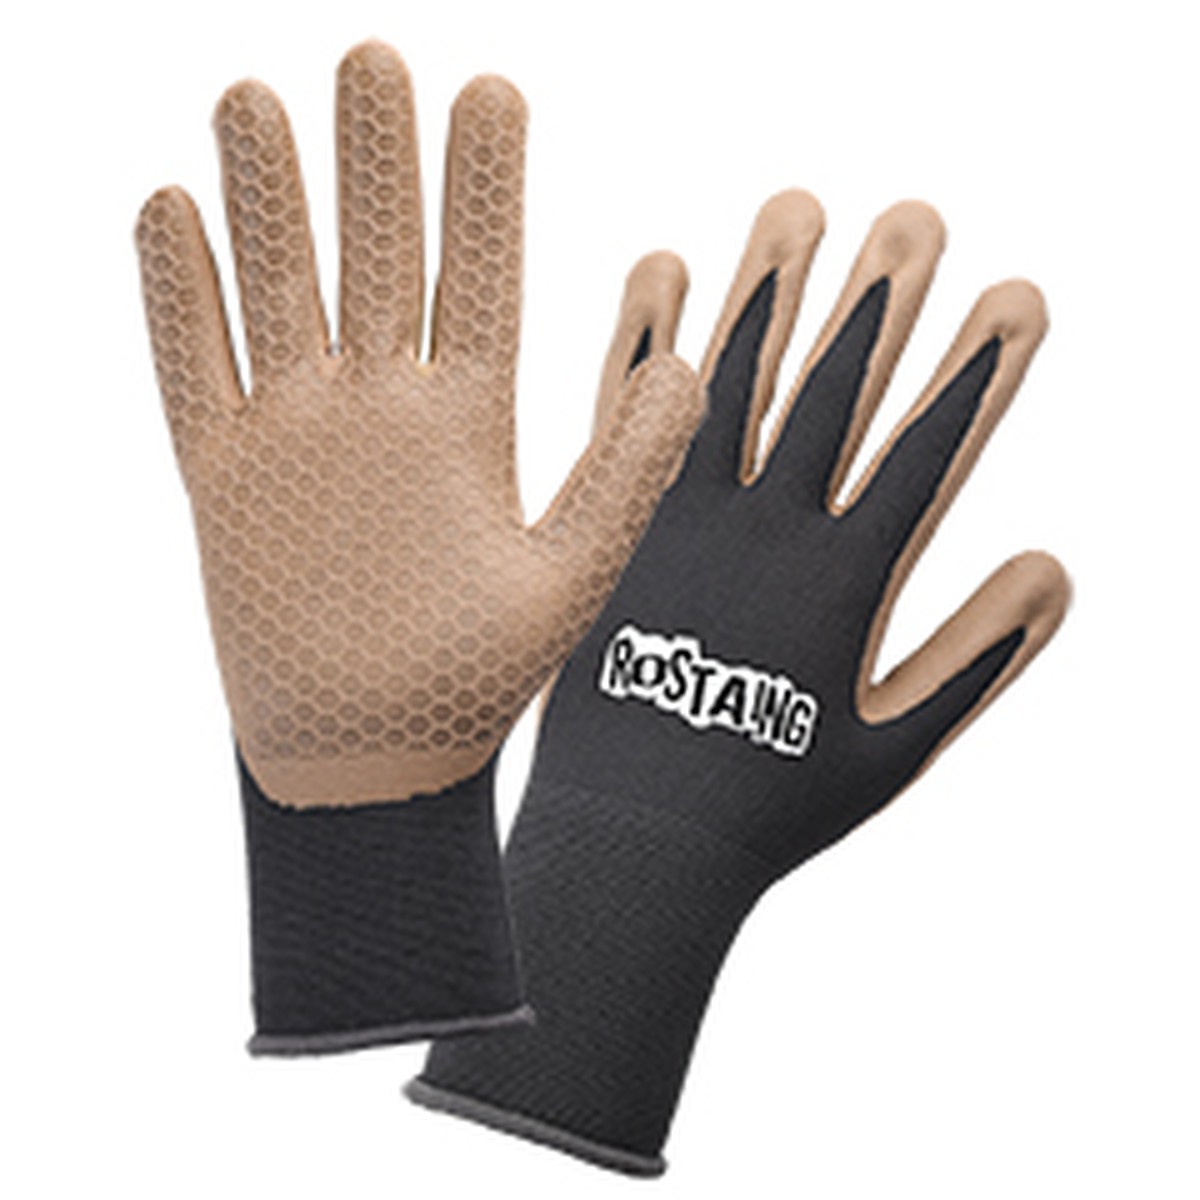 Rostaing  Gants One4All  Taille 11